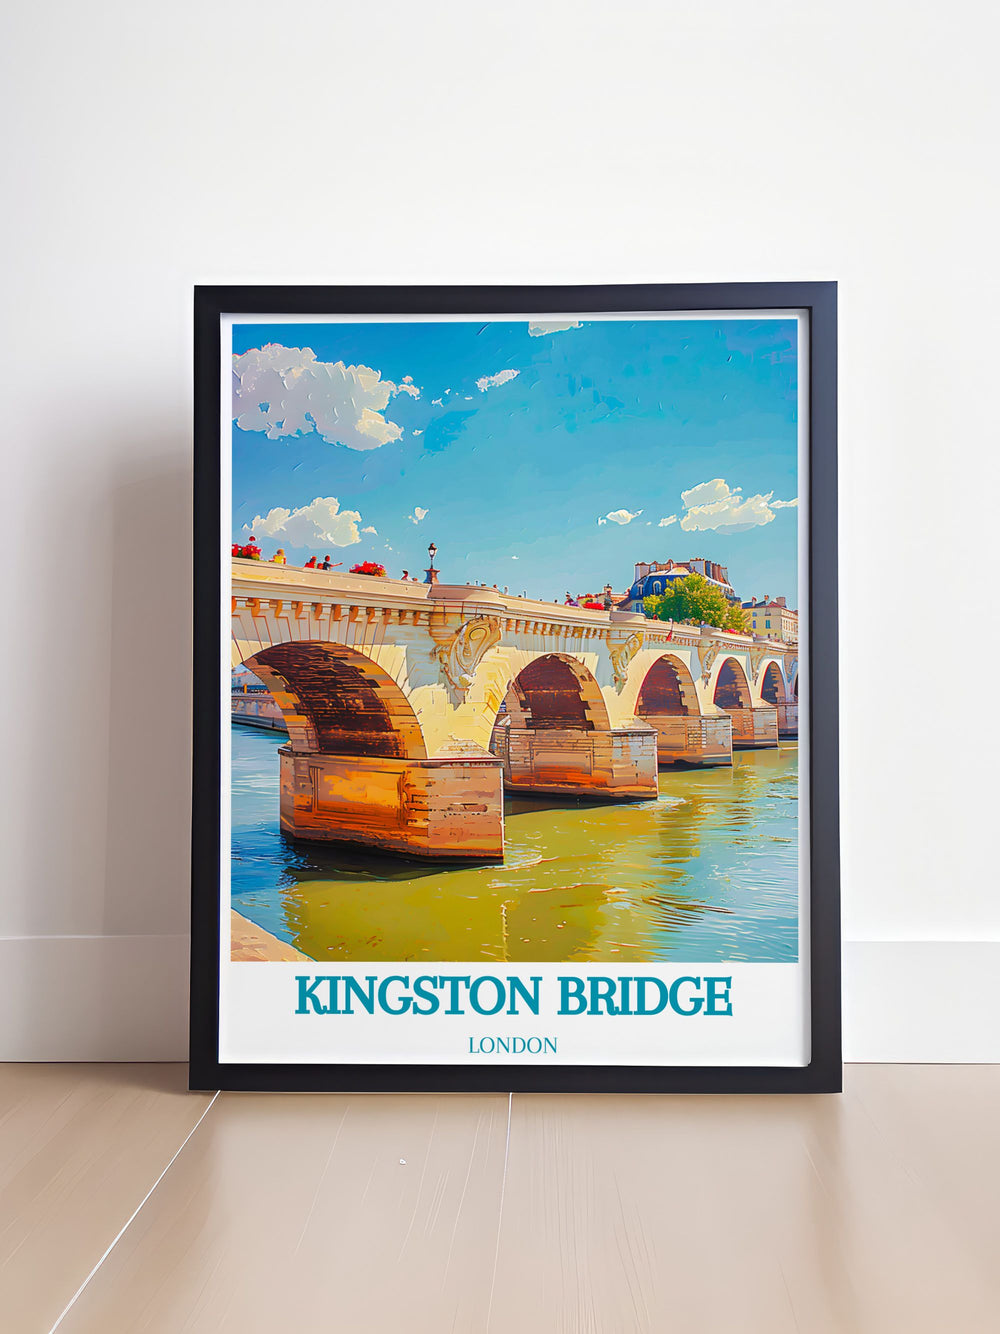 This detailed illustration of Kingston Bridge in London highlights its timeless elegance and historical importance, perfect for any wall art collection.